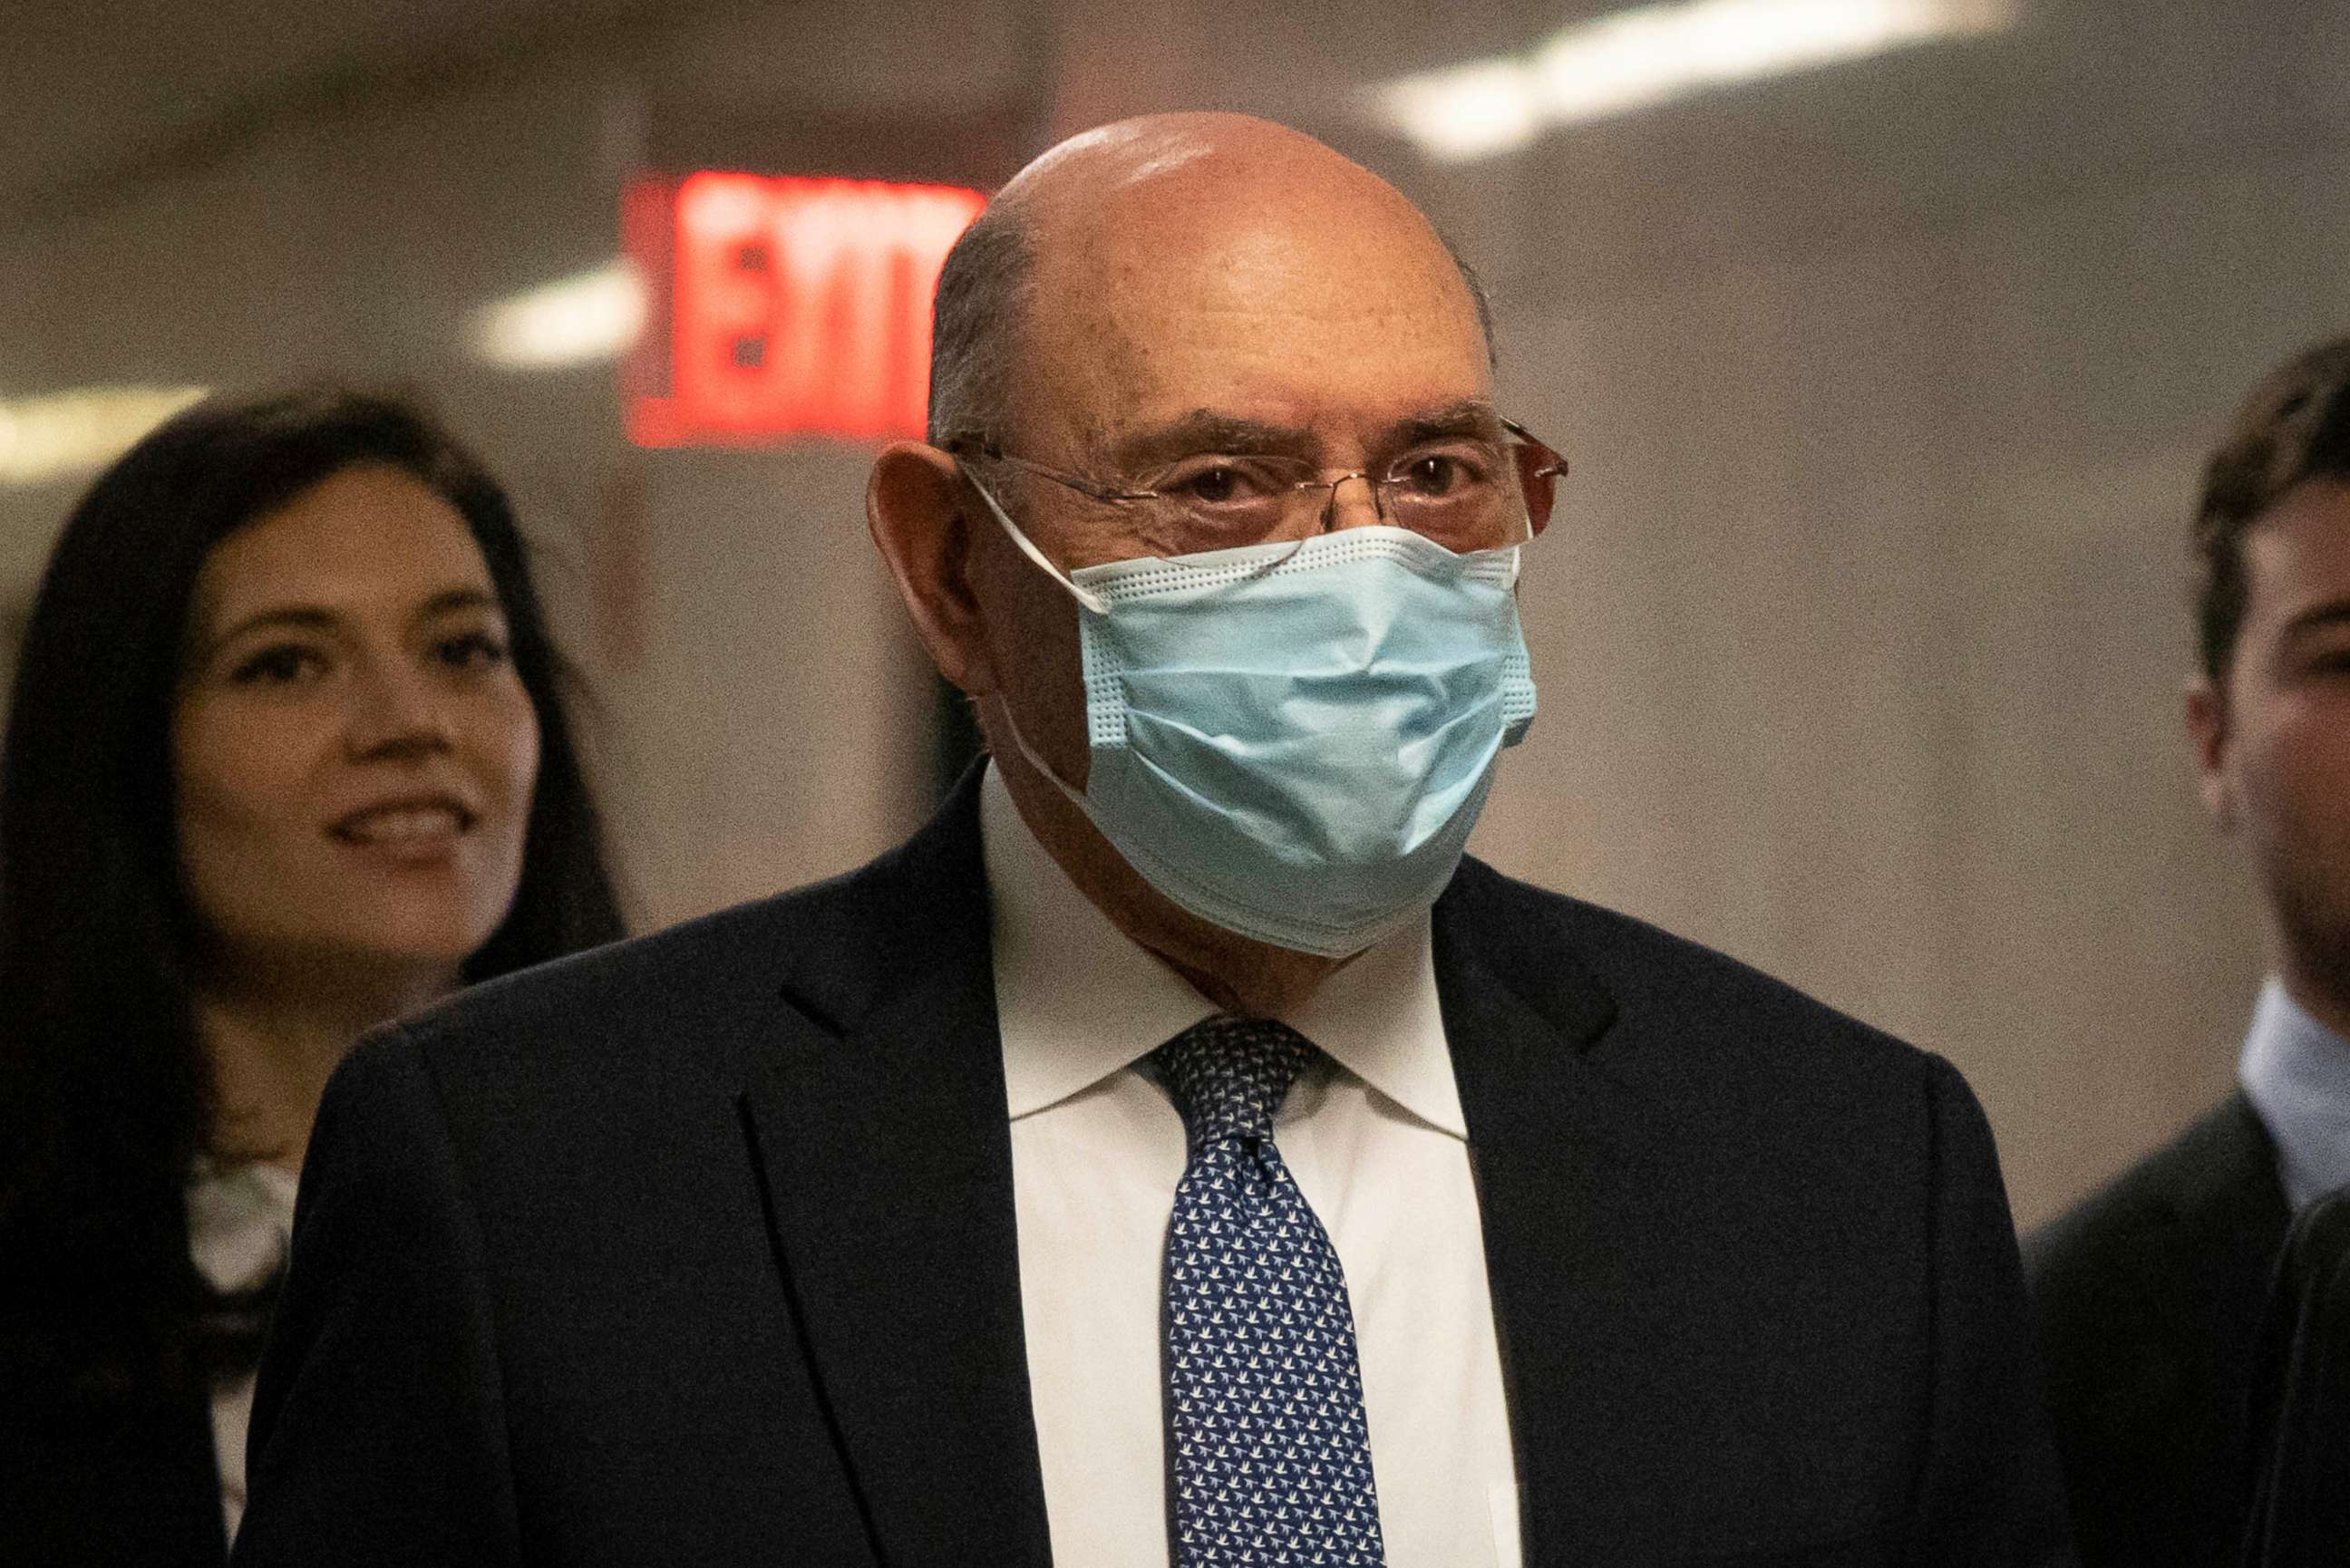 PHOTO: Trump Organization's former Chief Financial Officer Allen Weisselberg arrives to the courtroom in New York, Thursday, Nov. 17, 2022.